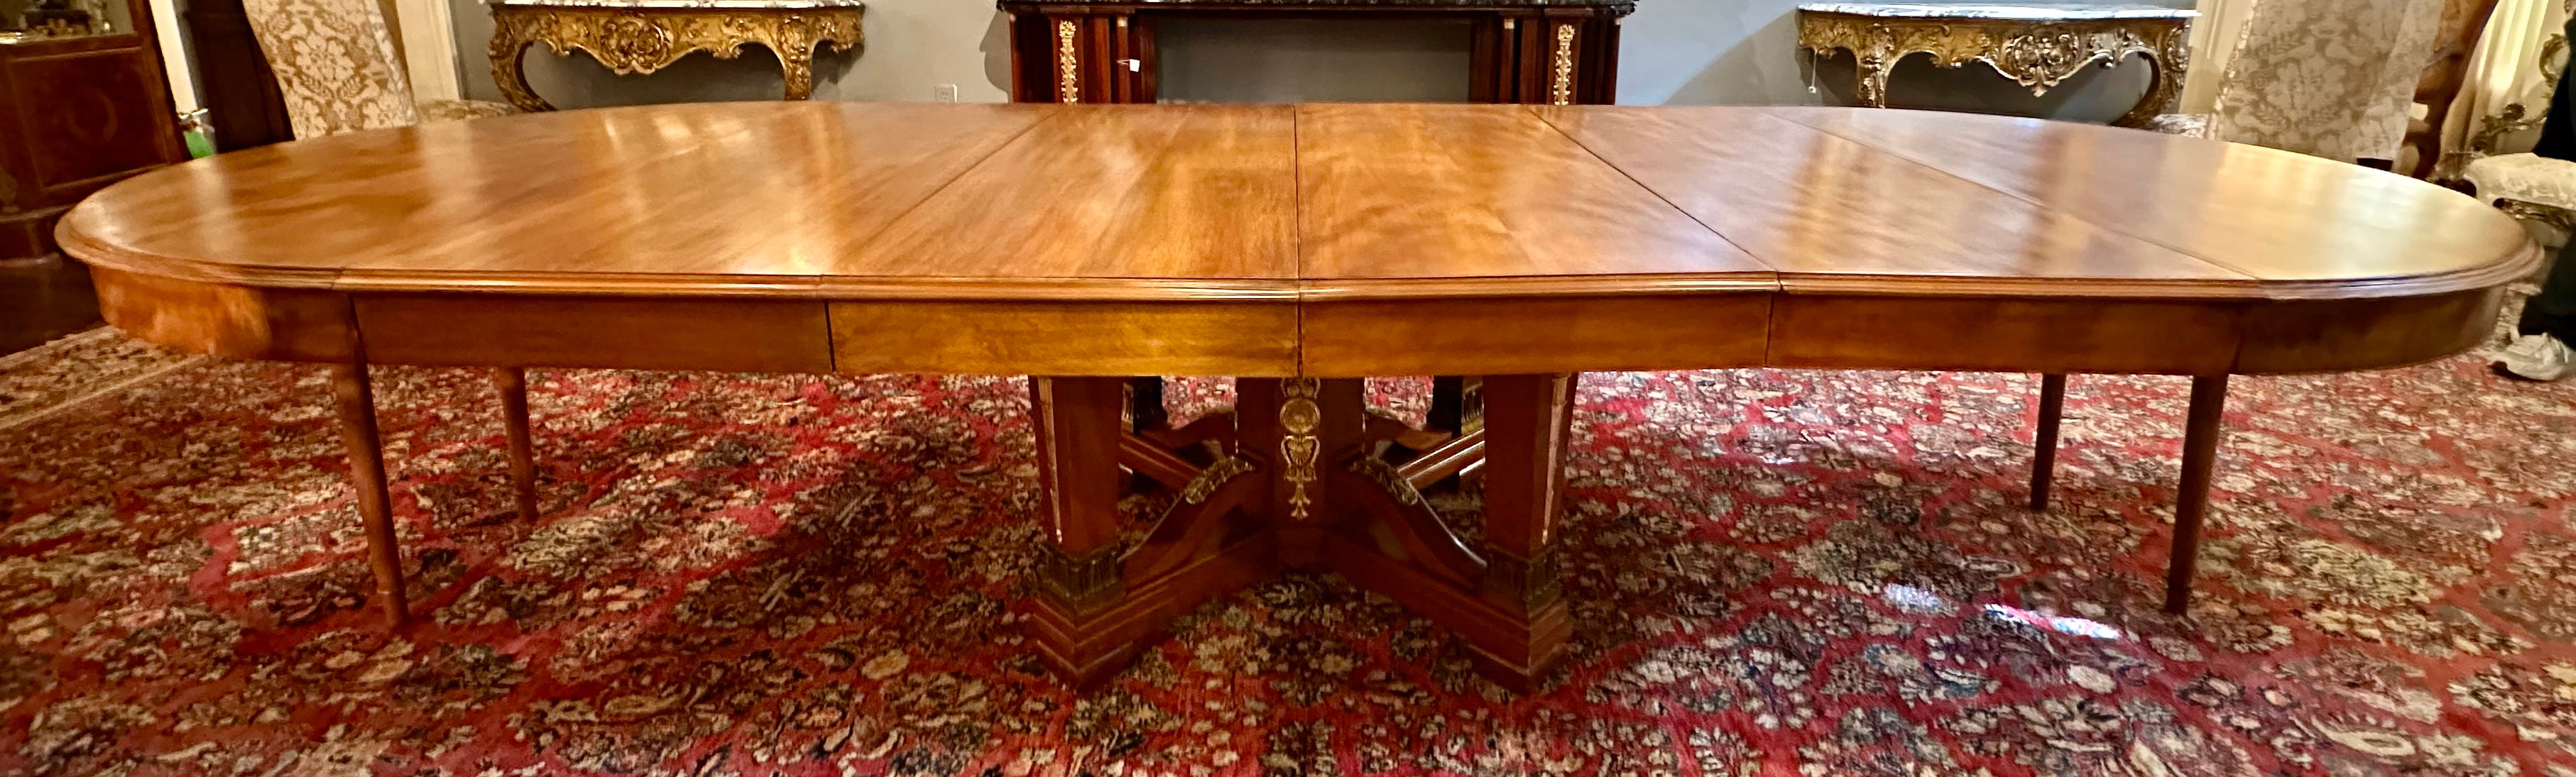 Antique French Empire Bronze D' Ore Mounted Mahogany Dining Table, Circa 1890.
Photographed with the leaves in it at 11 feet 1 inch
Breaks down to a 55